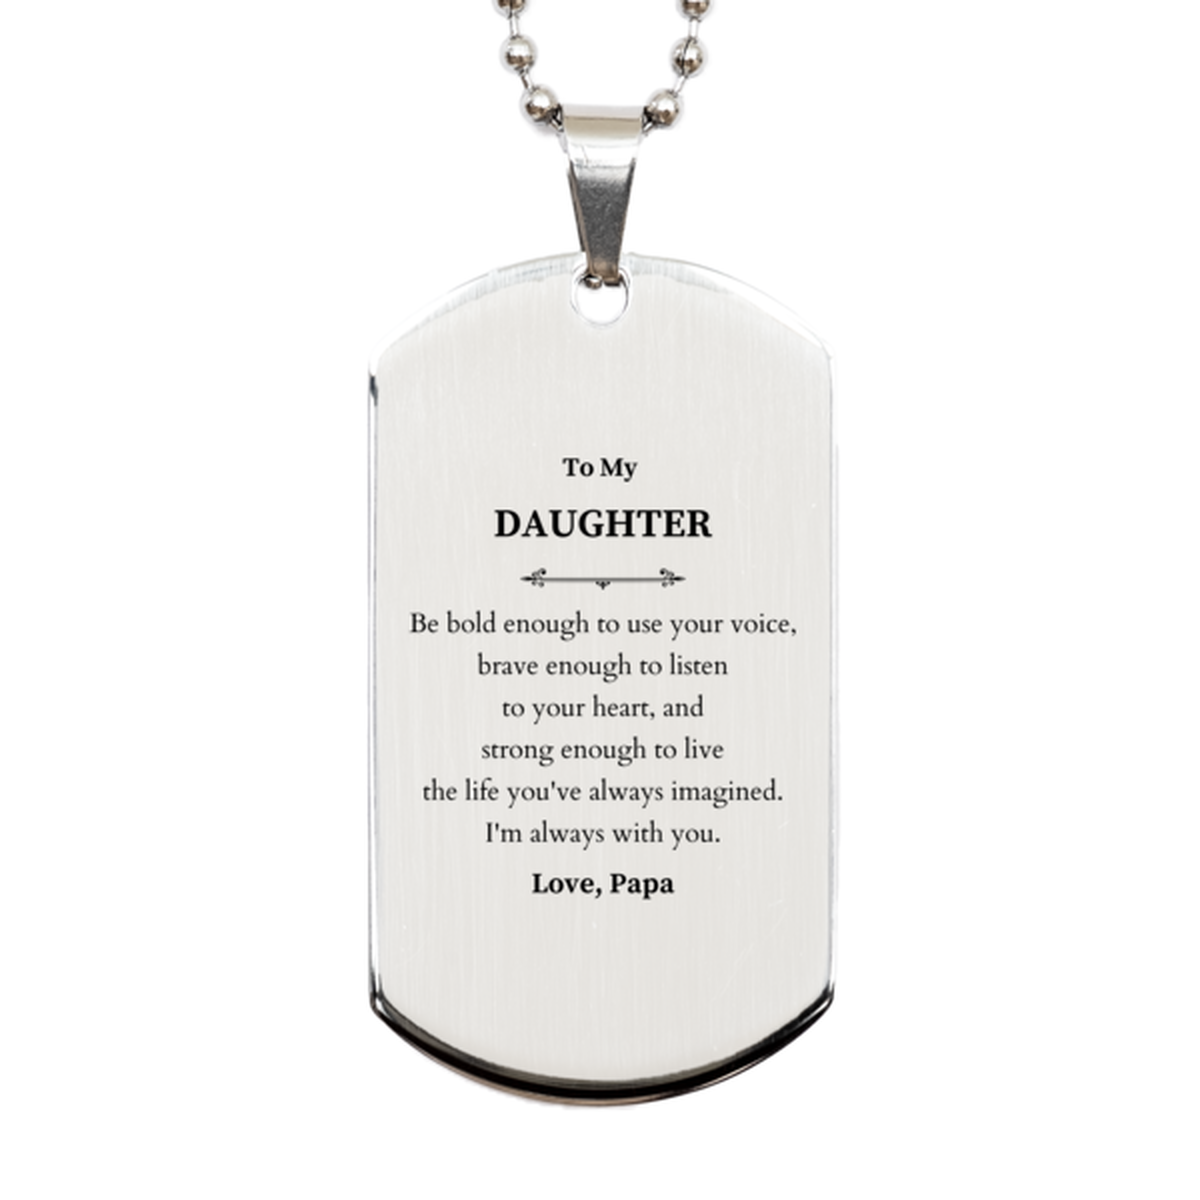 Keepsake Daughter Silver Dog Tag Gift Idea Graduation Christmas Birthday Daughter from Papa, Daughter Be bold enough to use your voice, brave enough to listen to your heart. Love, Papa